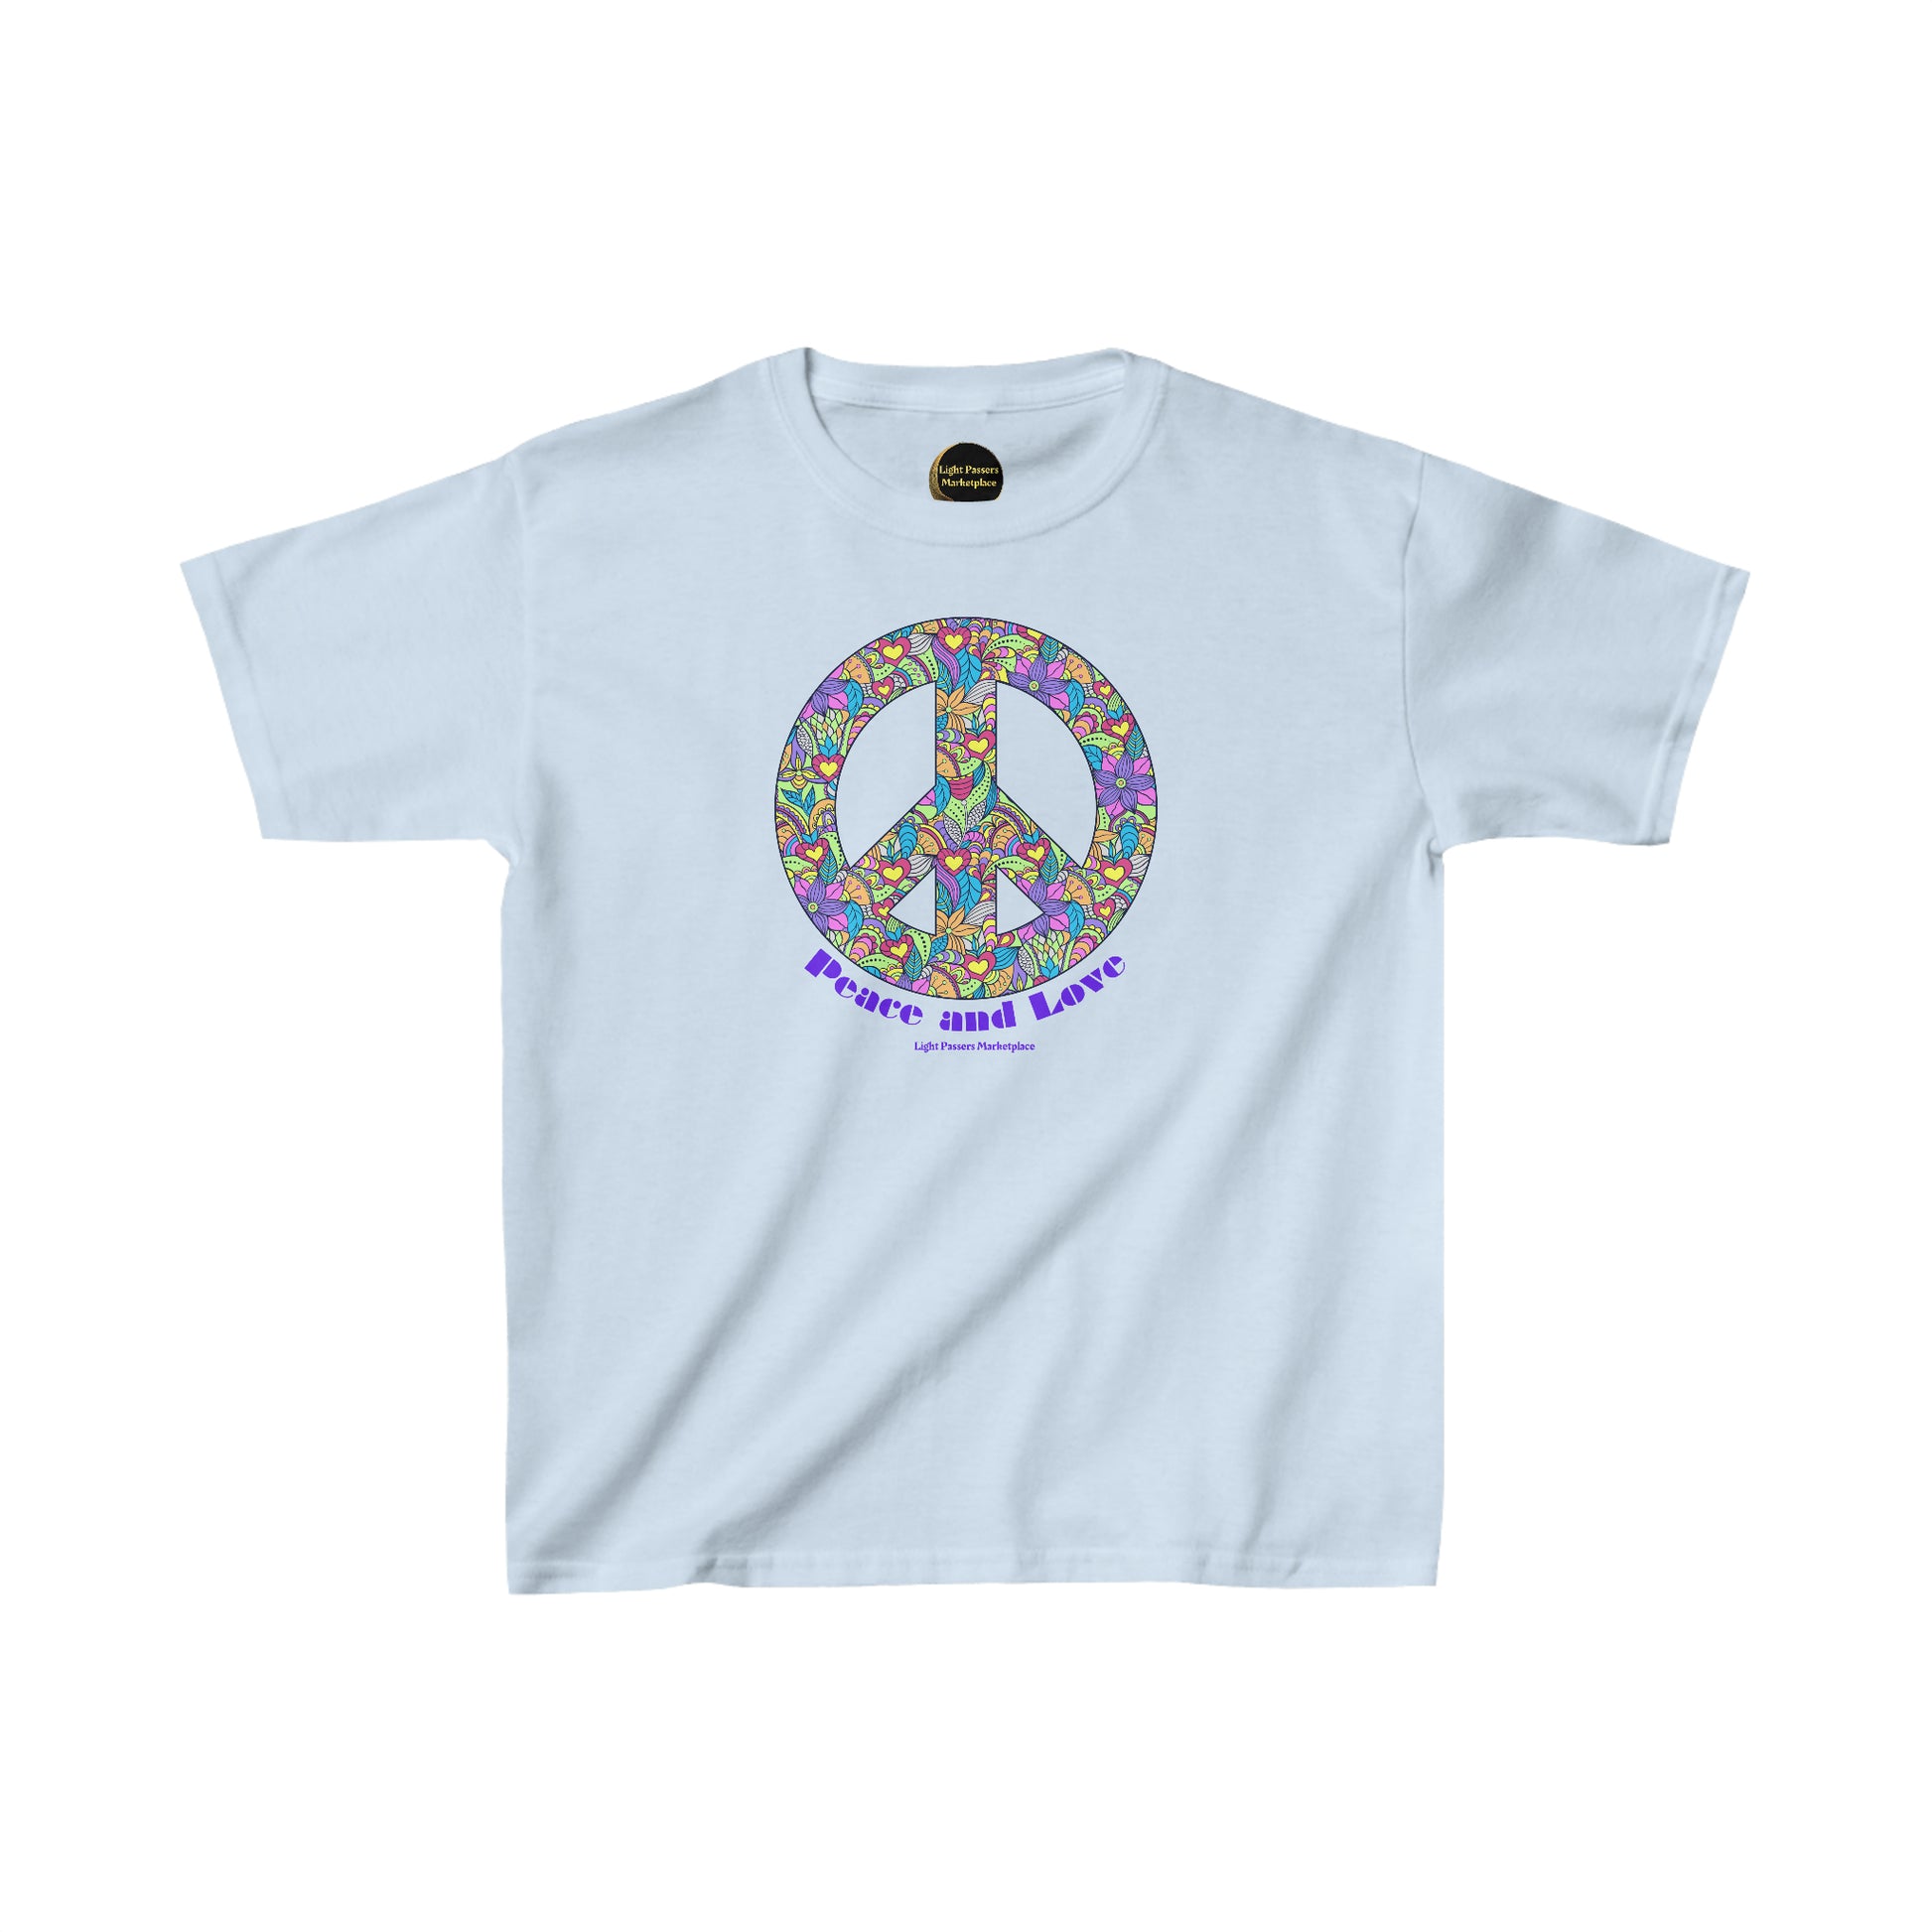 Youth heavy cotton t-shirt featuring a peace sign adorned with flowers and hearts. Made of 100% cotton for solid colors, with twill tape shoulders for durability and curl-resistant collar. Ethically sourced US cotton.